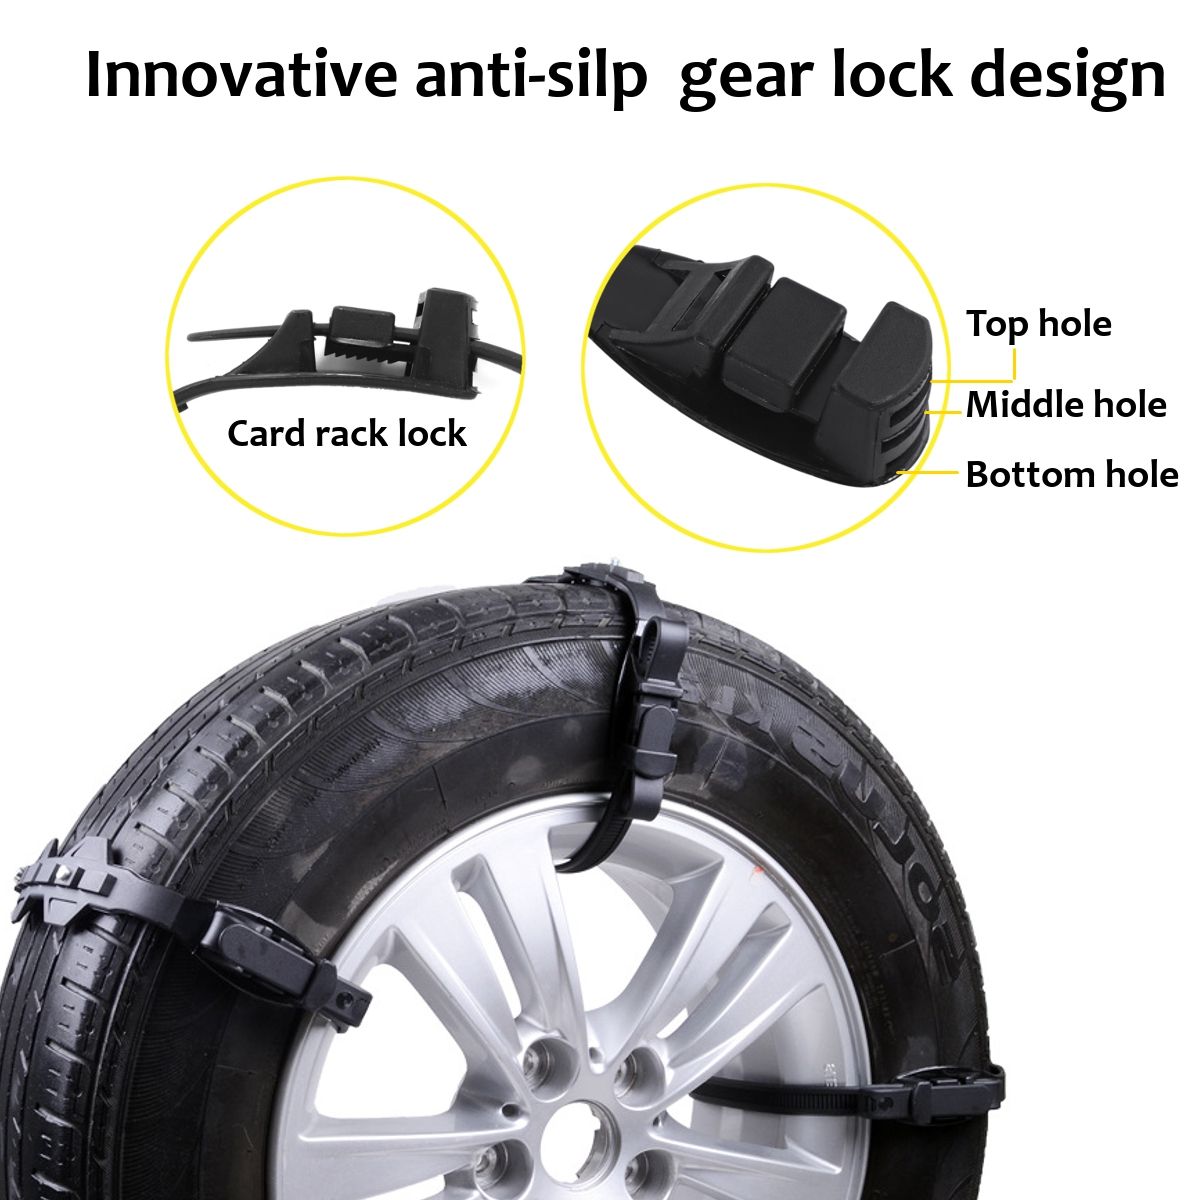 TPU-Auto-Tire-Snow-Chain-Anti-Skip-Belt-Safe-Driving-For-Snow-Ice-Sand-Muddy-Offroad-For-Car-SUV-VAN-1594375